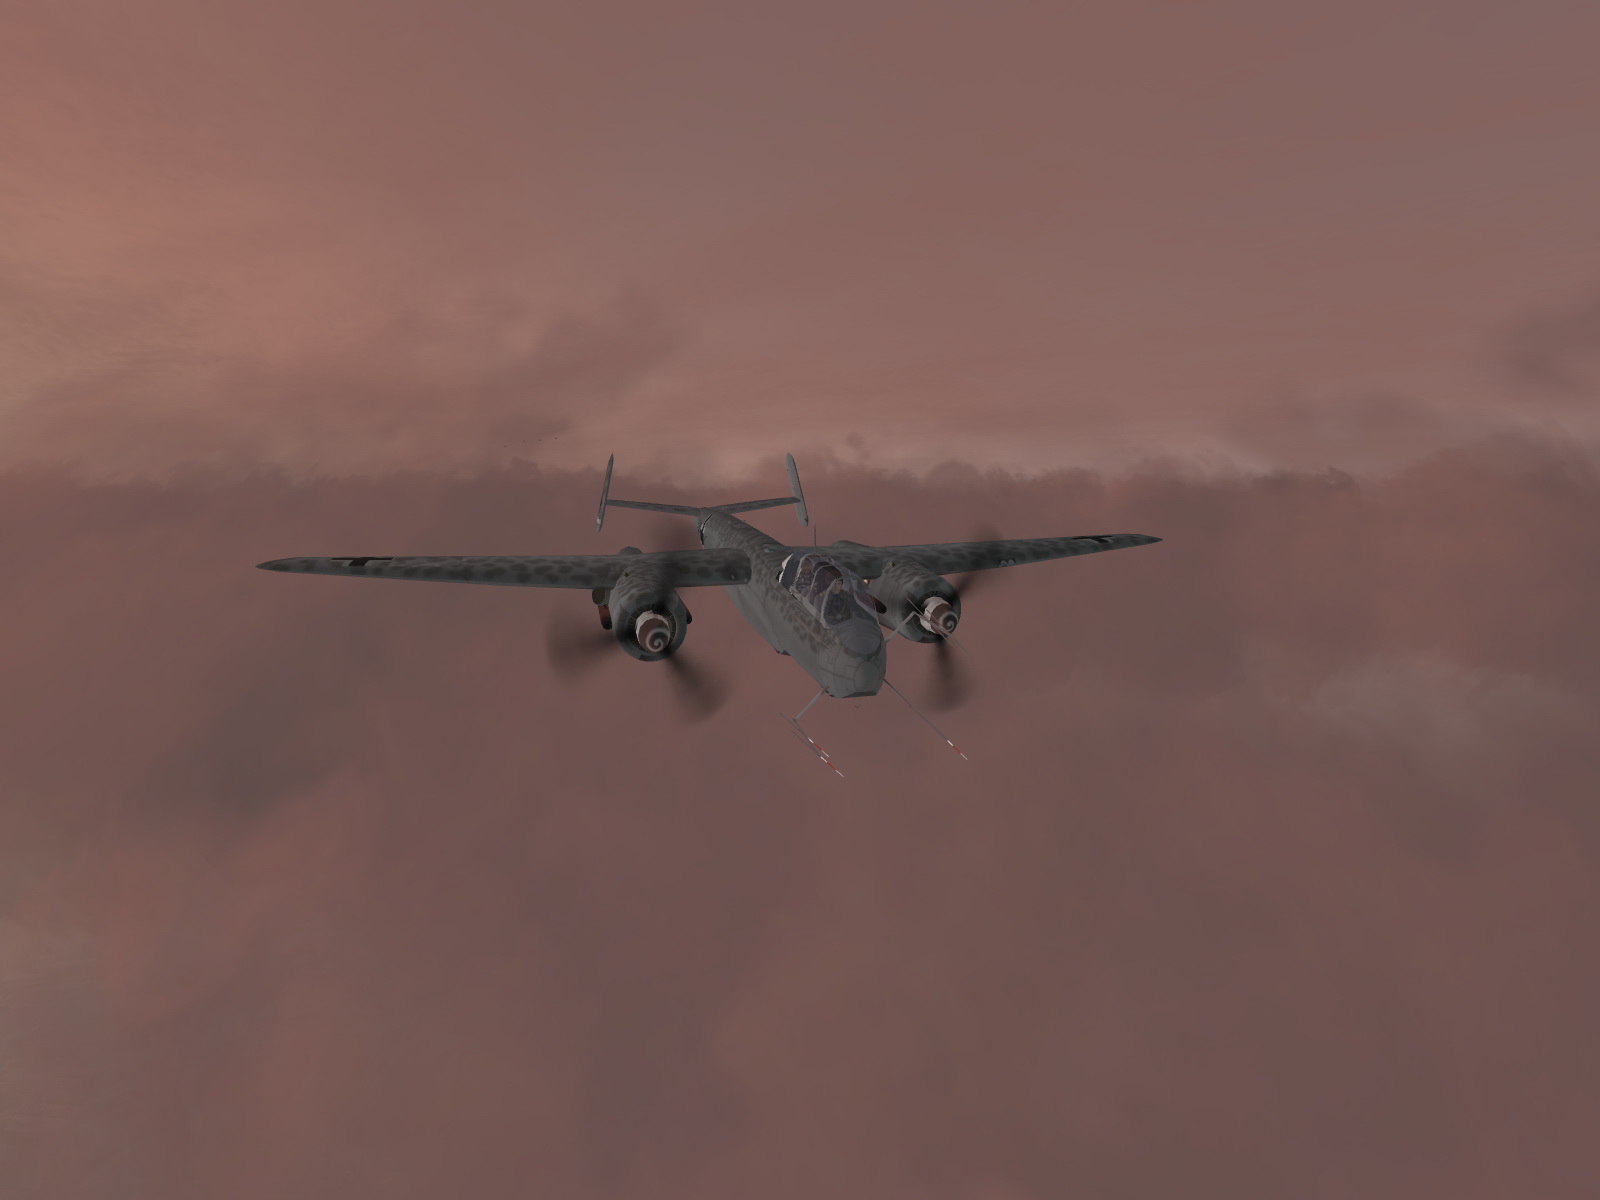 IL2 MH He 219A Nachtjager on dawn patrol over Germany 03